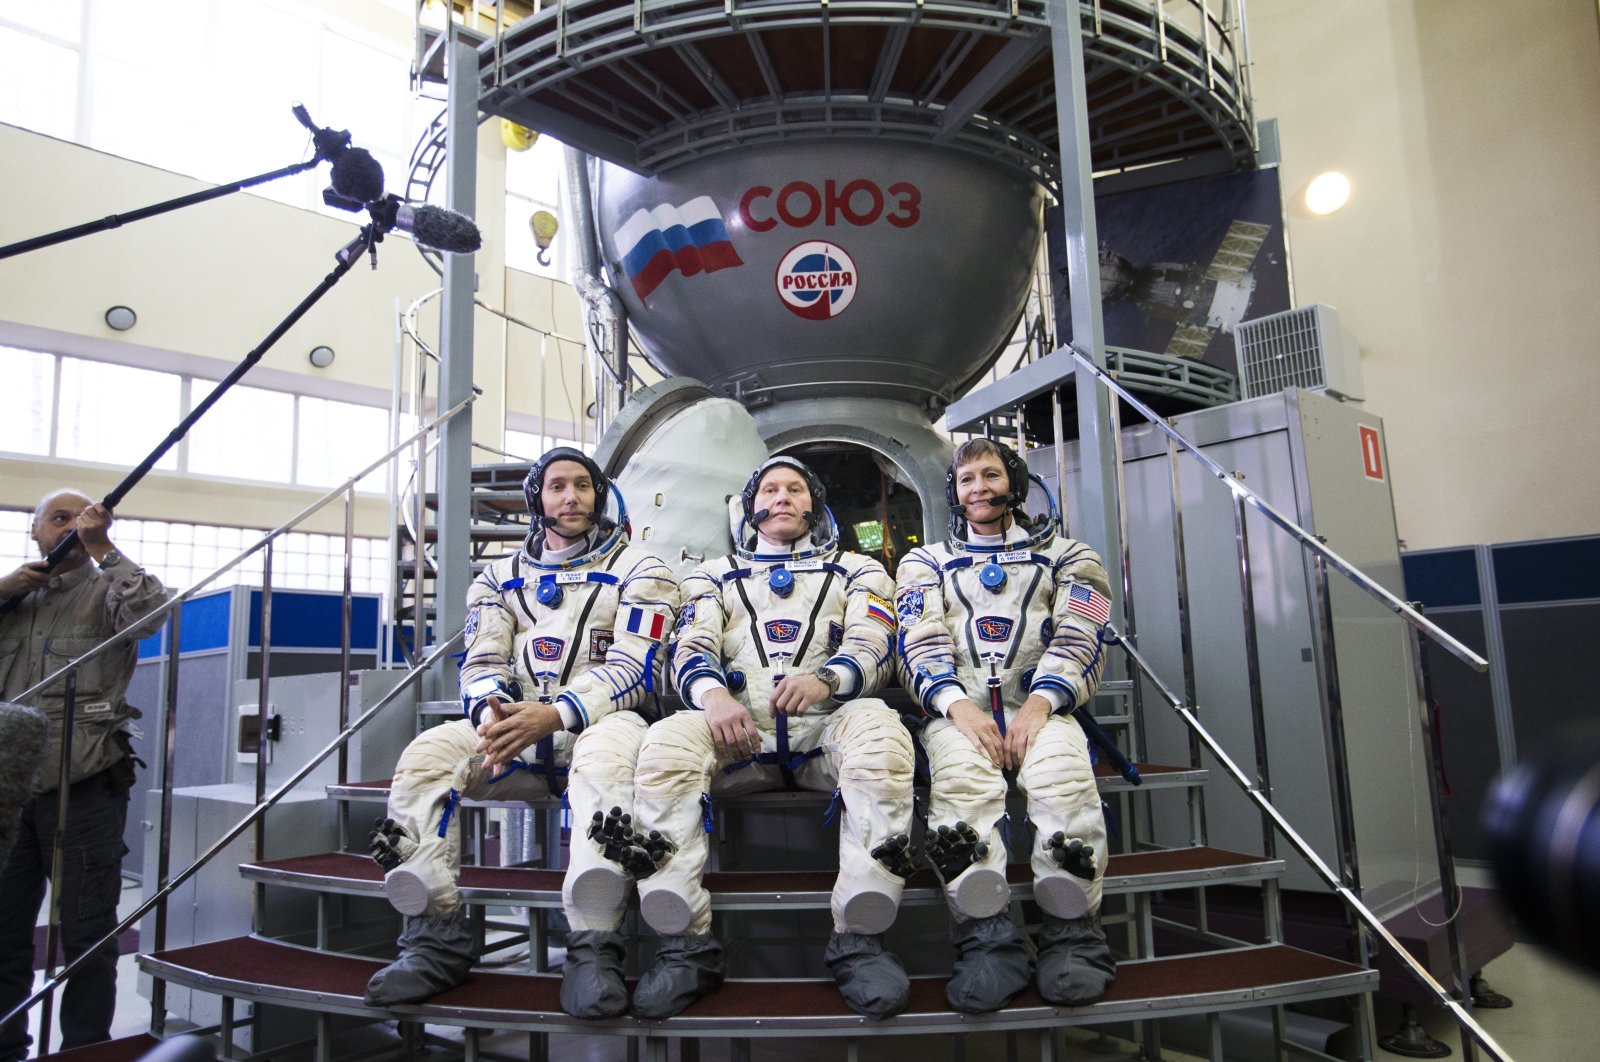 ESA French astronaut Thomas Pesquet, left, Russian cosmonaut Oleg Novitsky, center, and U.S. astronaut Peggy Annette Whitson pose for a photo before their final preflight practical examination in a mock-up of a Soyuz spacecraft at Russian Space Training Center in Star City, outside Moscow, Russia, Oct. 25, 2016. (AP File Photo)